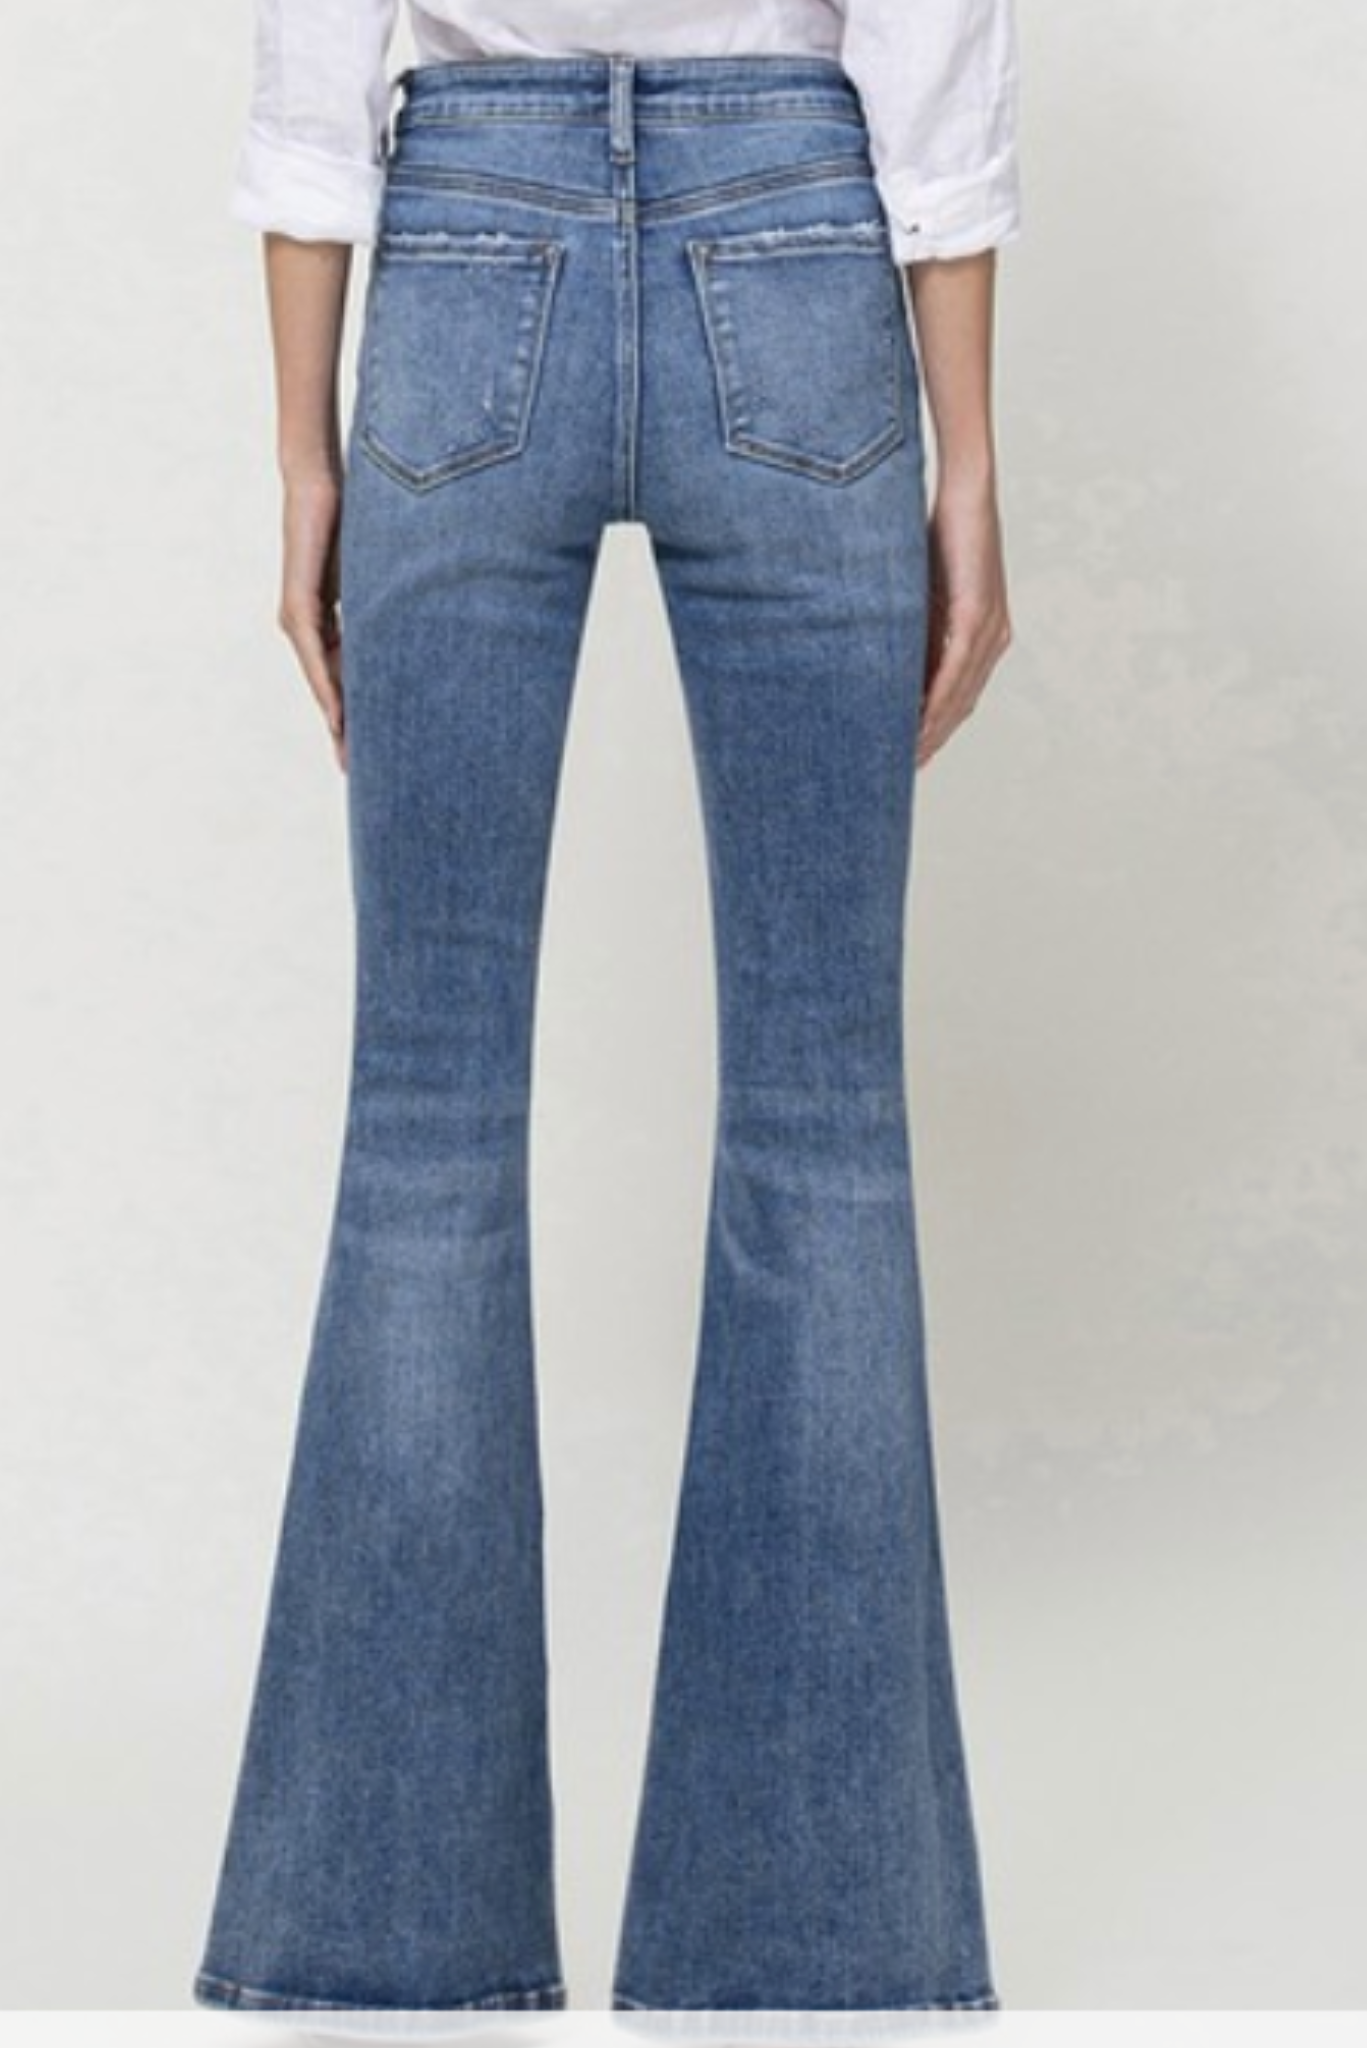 Load image into Gallery viewer, Vervet Medium Wash High Rise Distressed Flare Jeans, vervet, denim, flares, flare jeans, distressed denim, Shop Style Your Senses By Mallory Fitzsimmons
